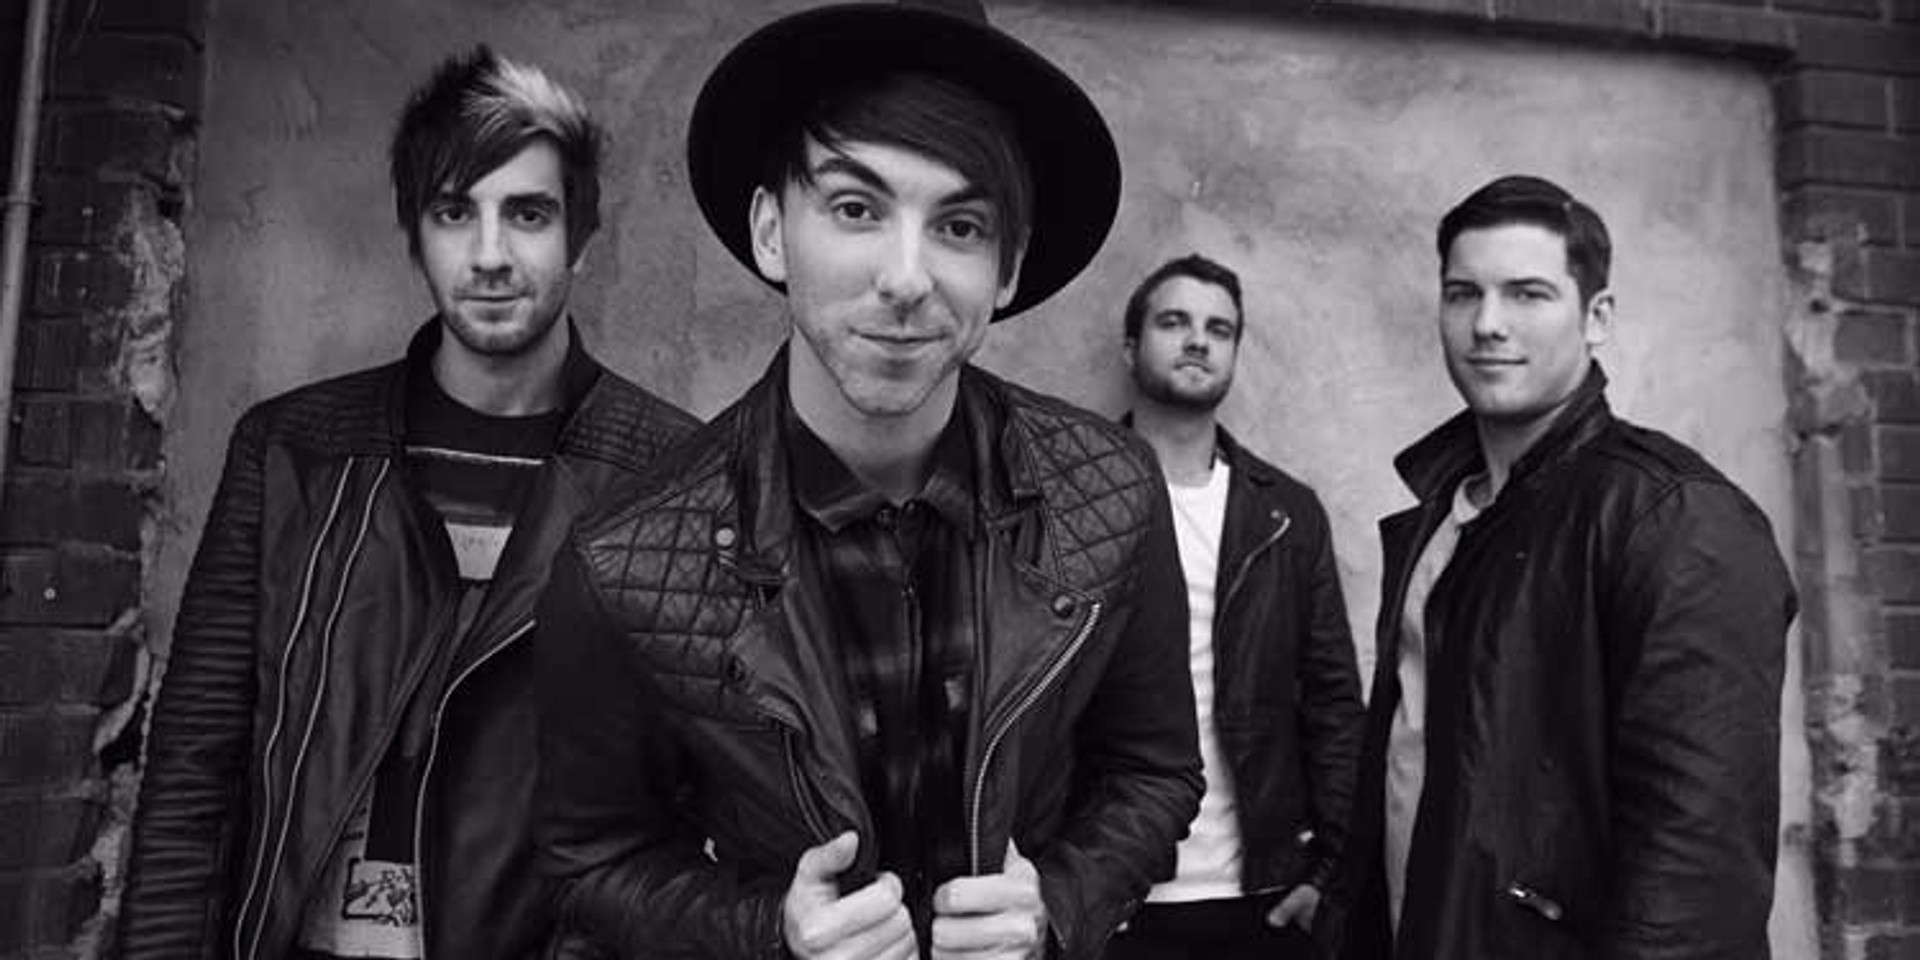 All Time Low returns to Manila for headlining concert in August